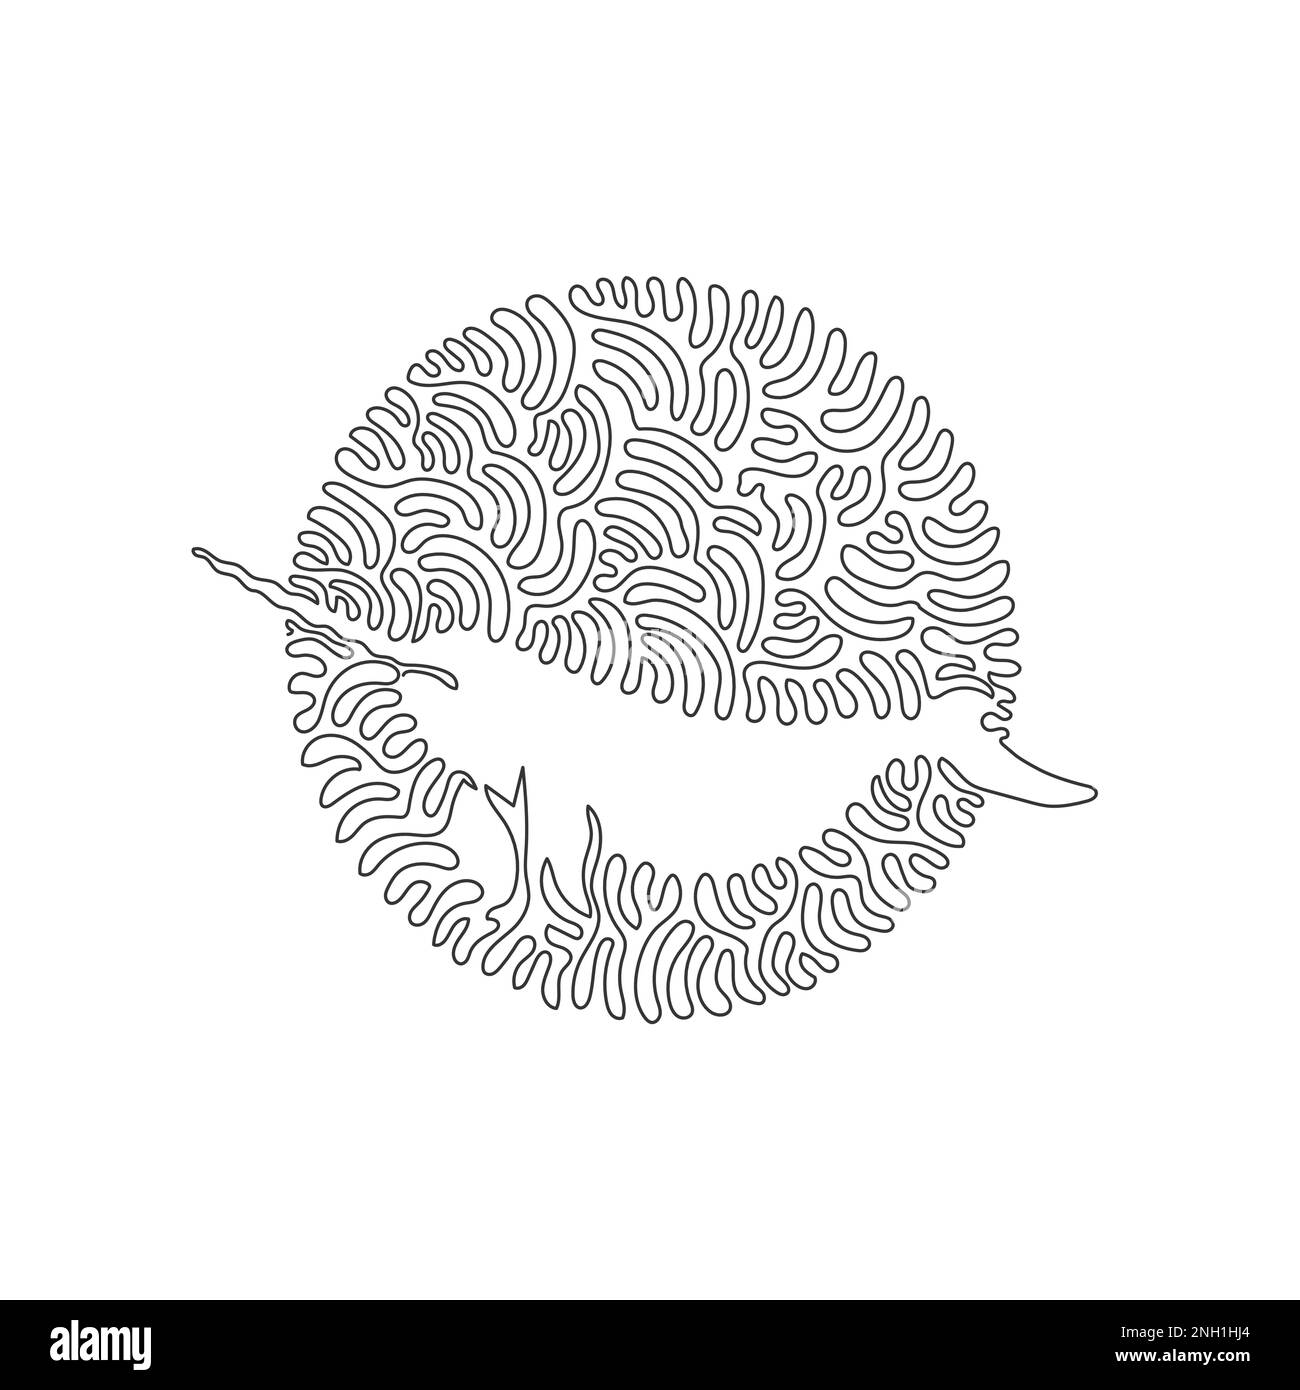 Continuous curve one line drawing of cute narwhal abstract art. Single line editable stroke vector illustration of narwhal with straight tusk Stock Vector